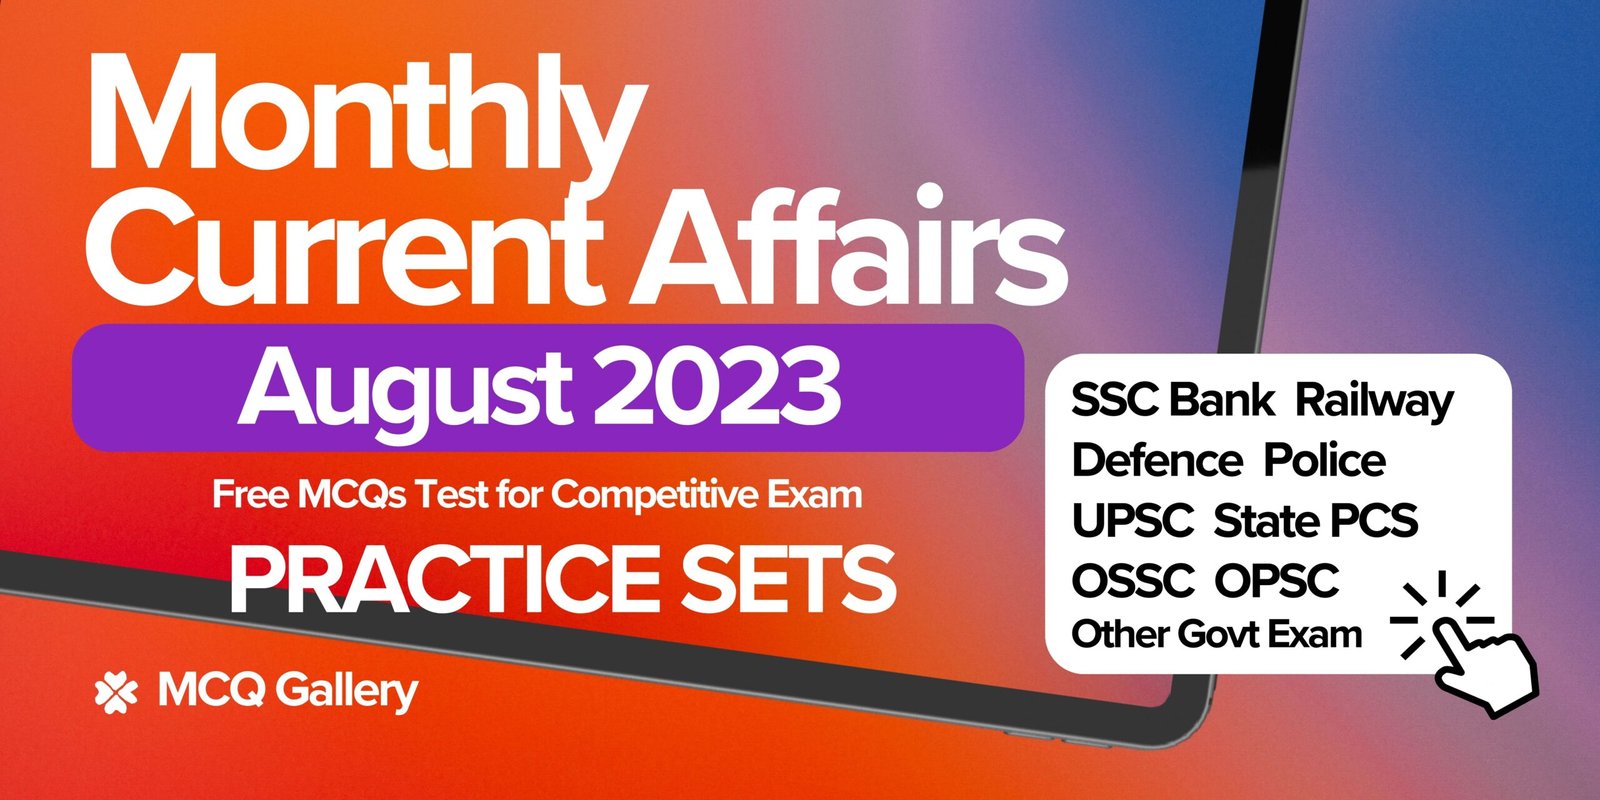 Monthly Current Affairs August 2023